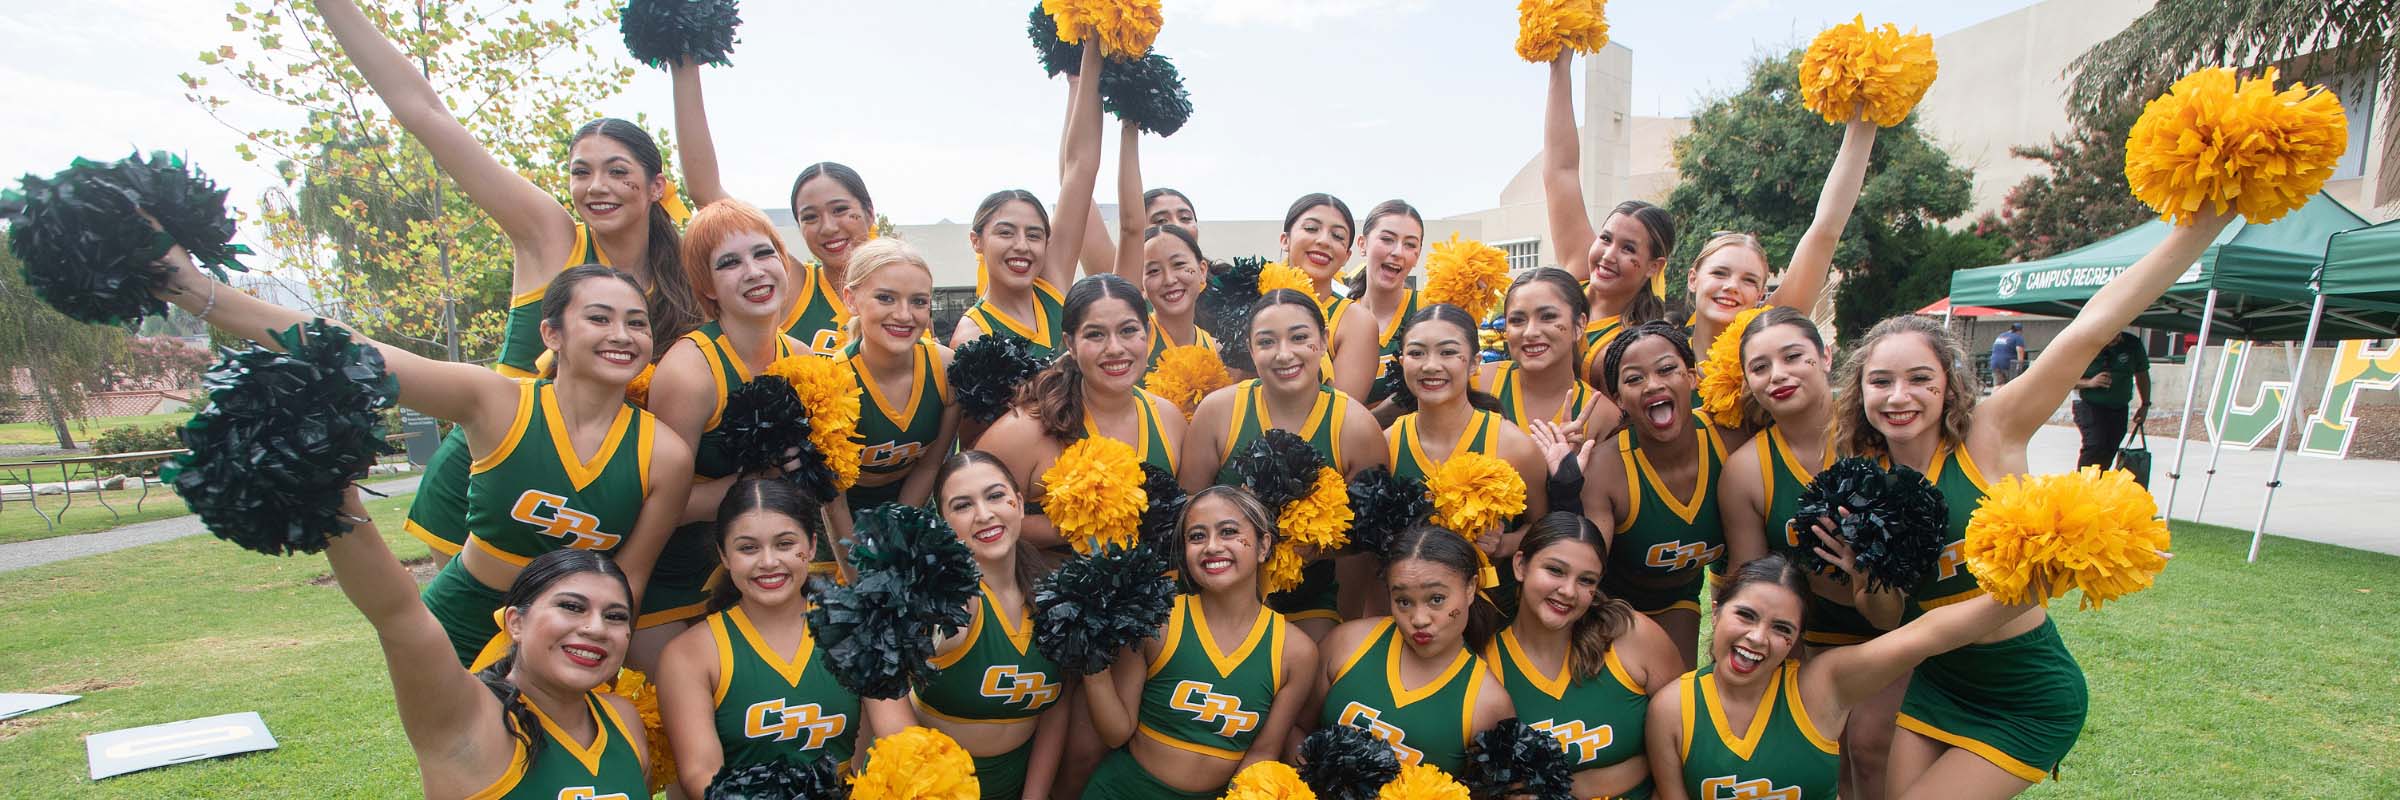 The CPP Cheer squad poses for the camera during CPP Fest